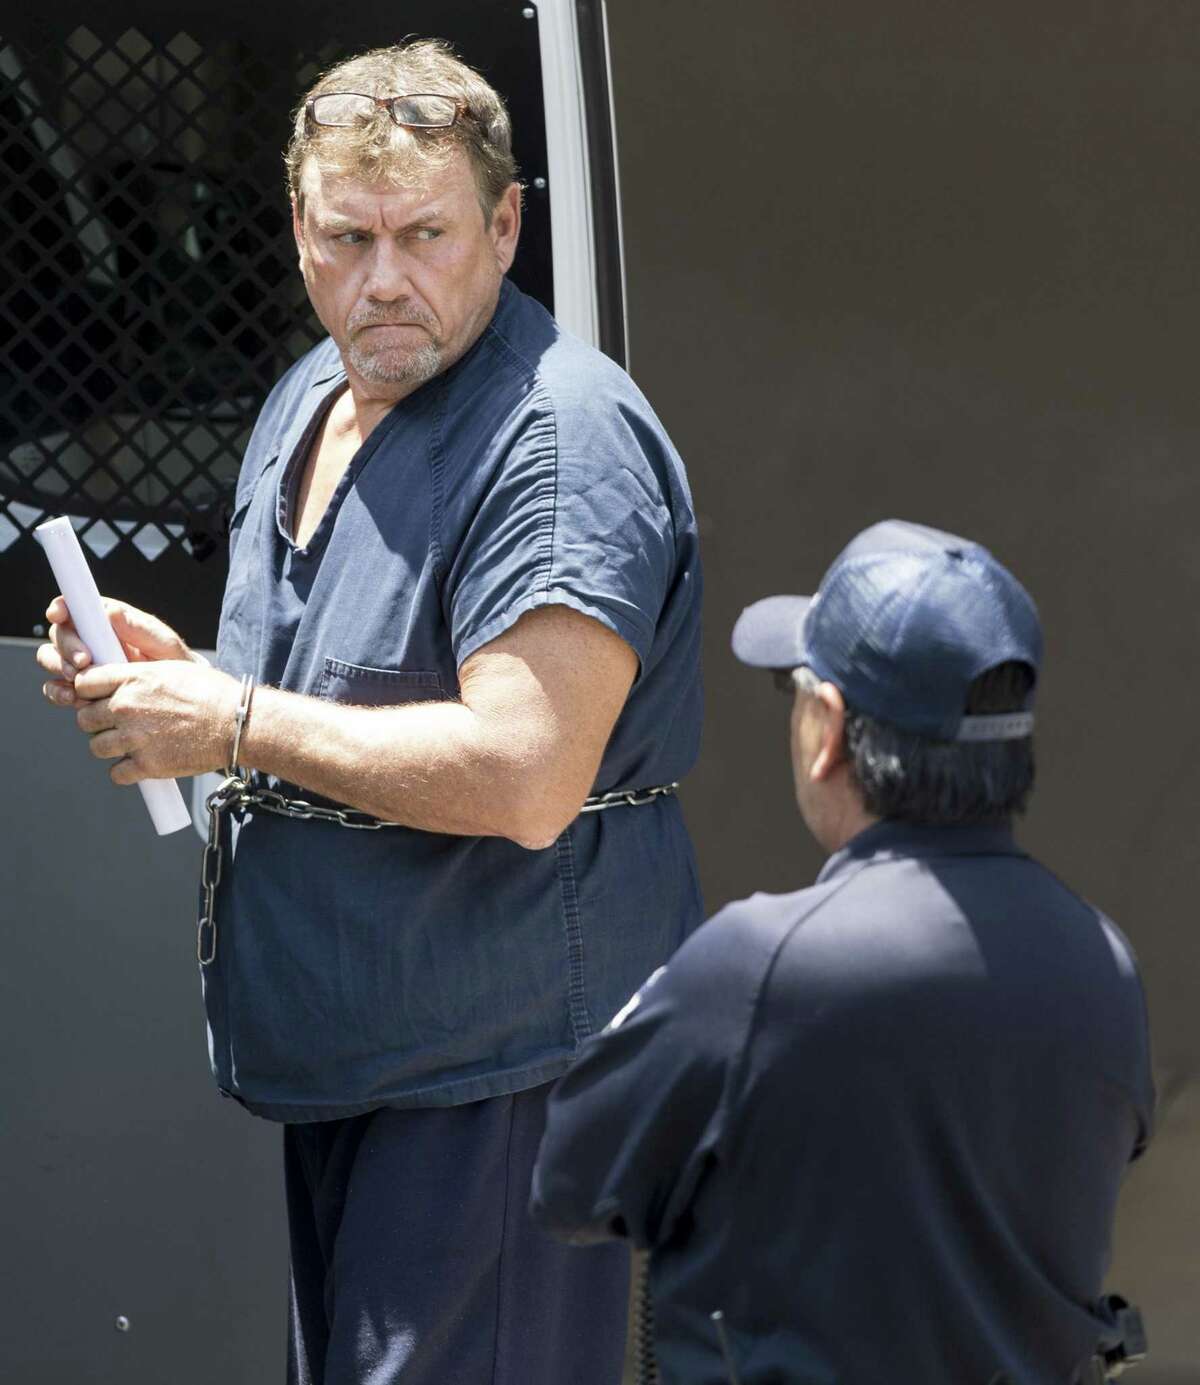 Robert Ussery, is escorted Thursday, May 24, 2018 out of the federal courthouse in San Antonio after appearing before U.S. Magistrate Judge Henry Bemporad. He faces a federal charge with approaching Sutherland Springs pastor Frank Pomeroy on March 5 and telling him that his daughter, slain in the November massacre, never existed.